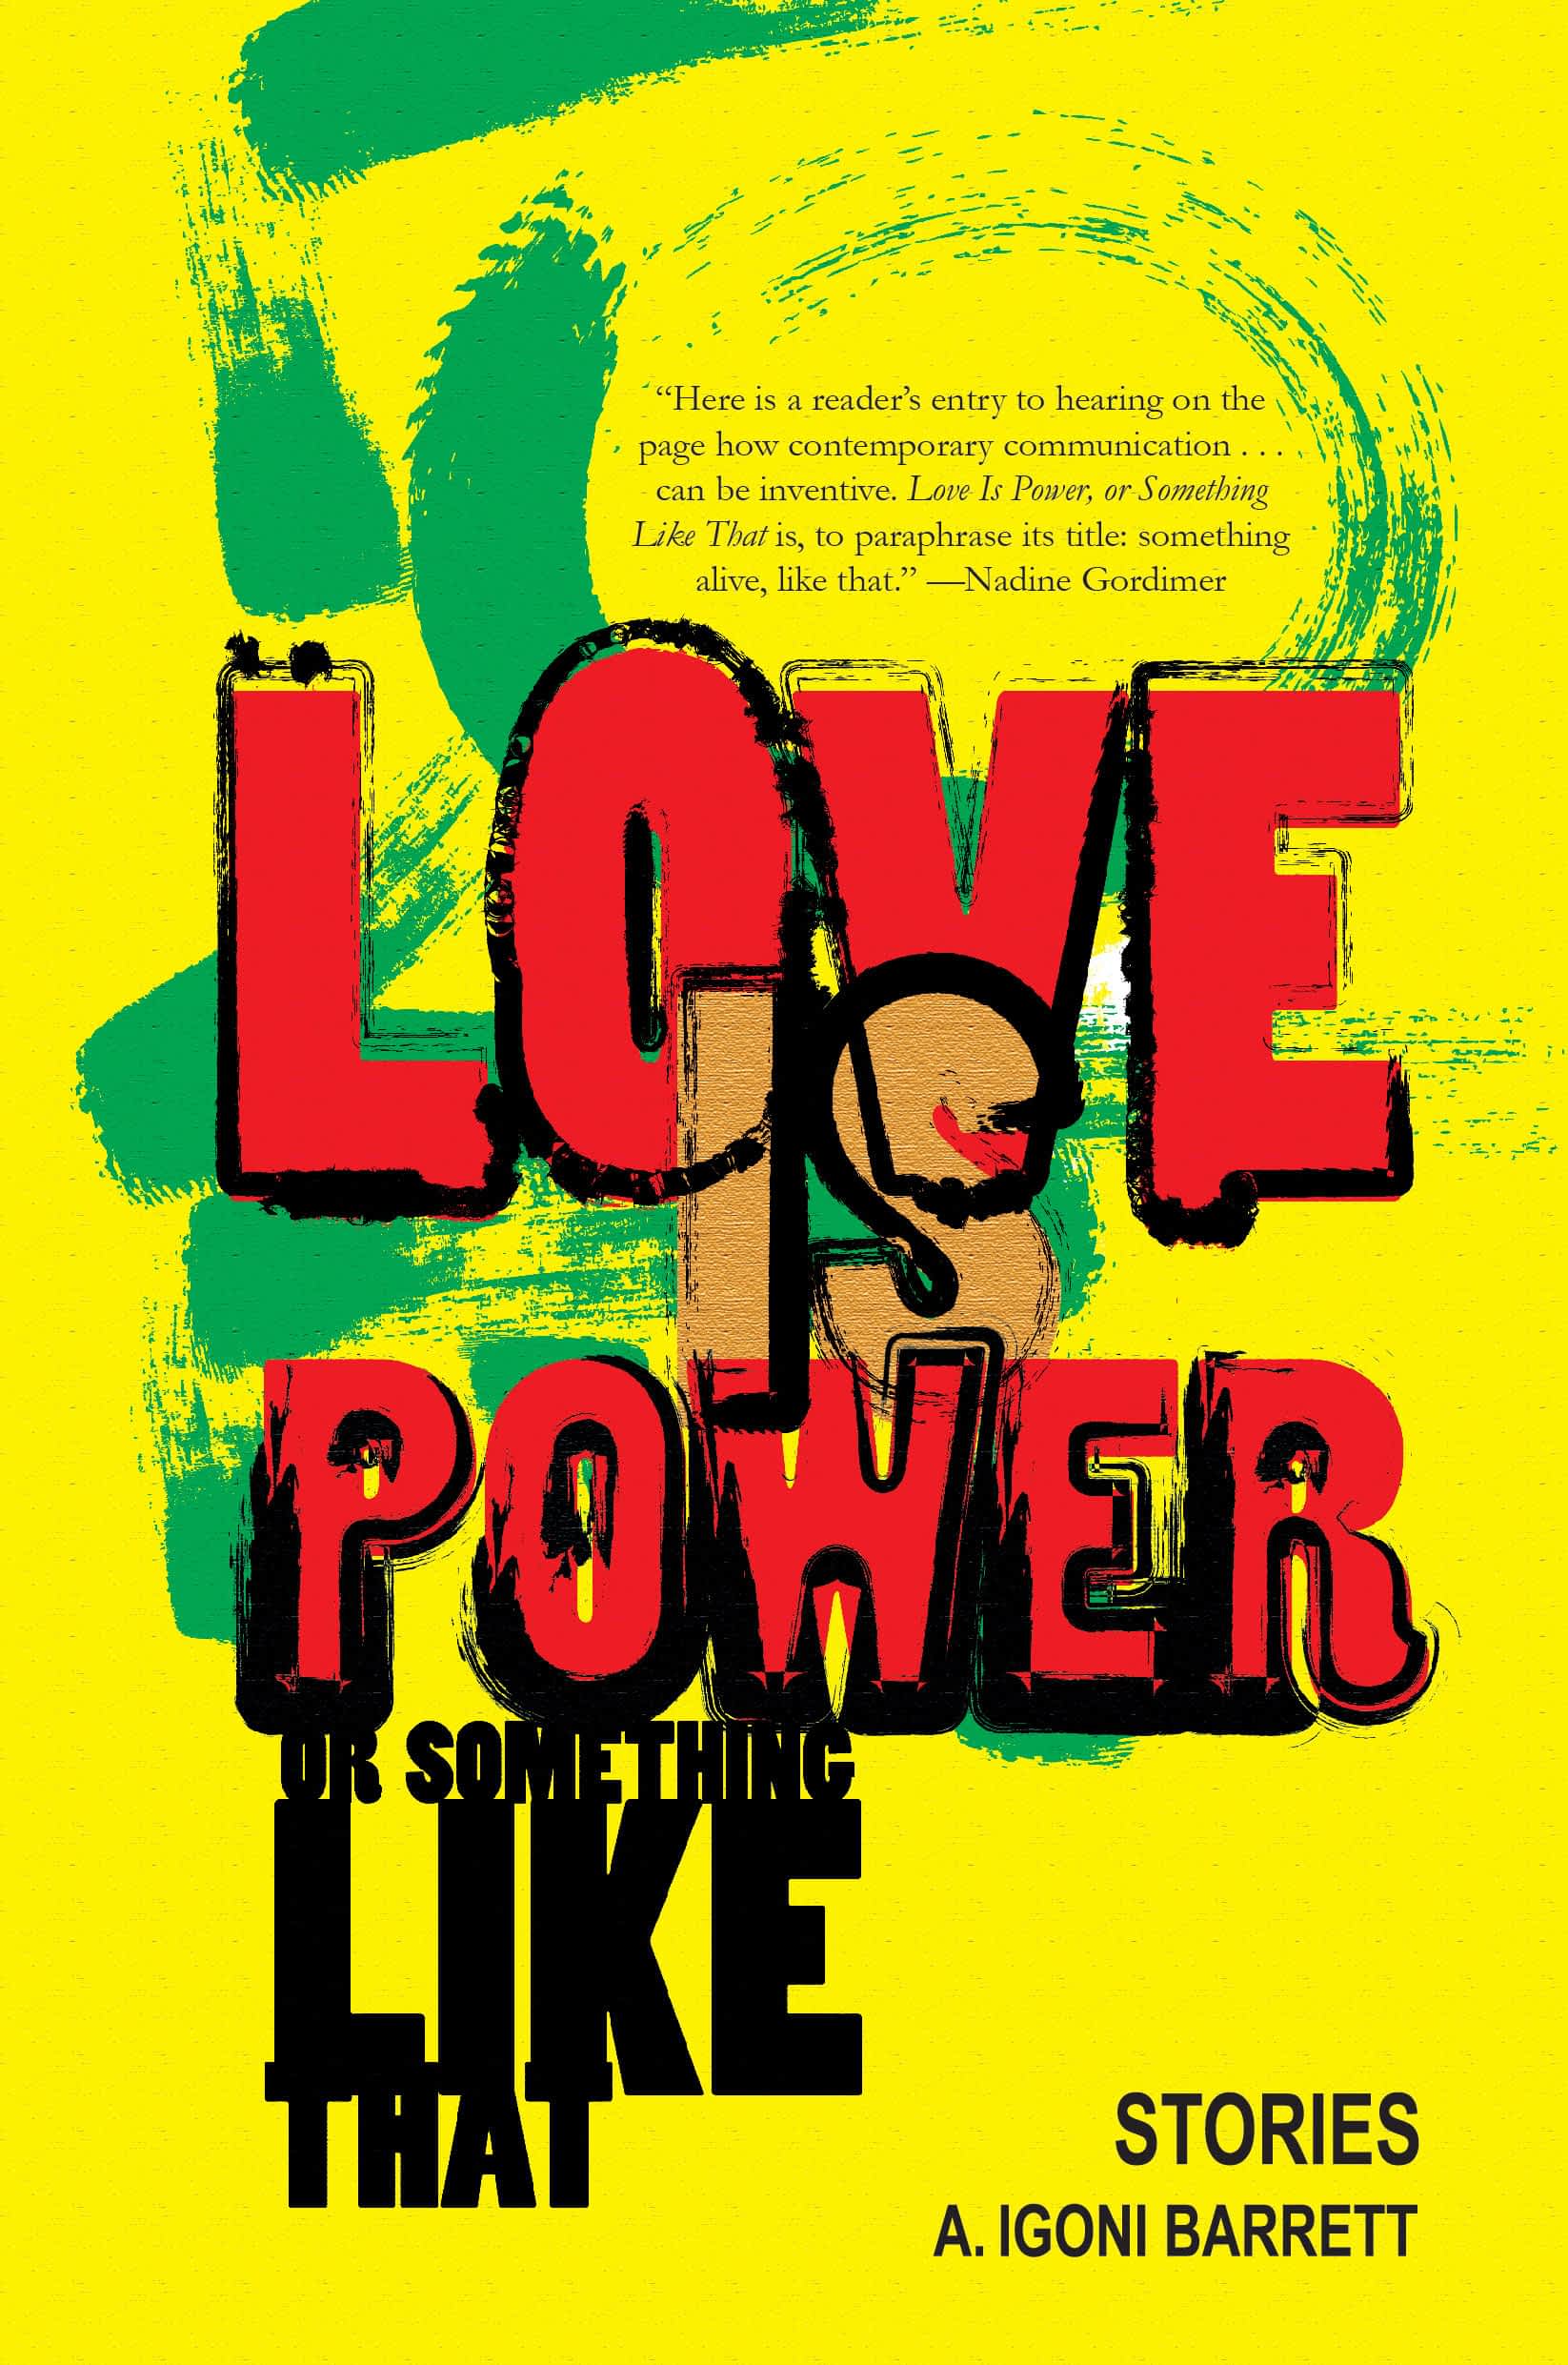 image61 Love is Power, or Something Like That